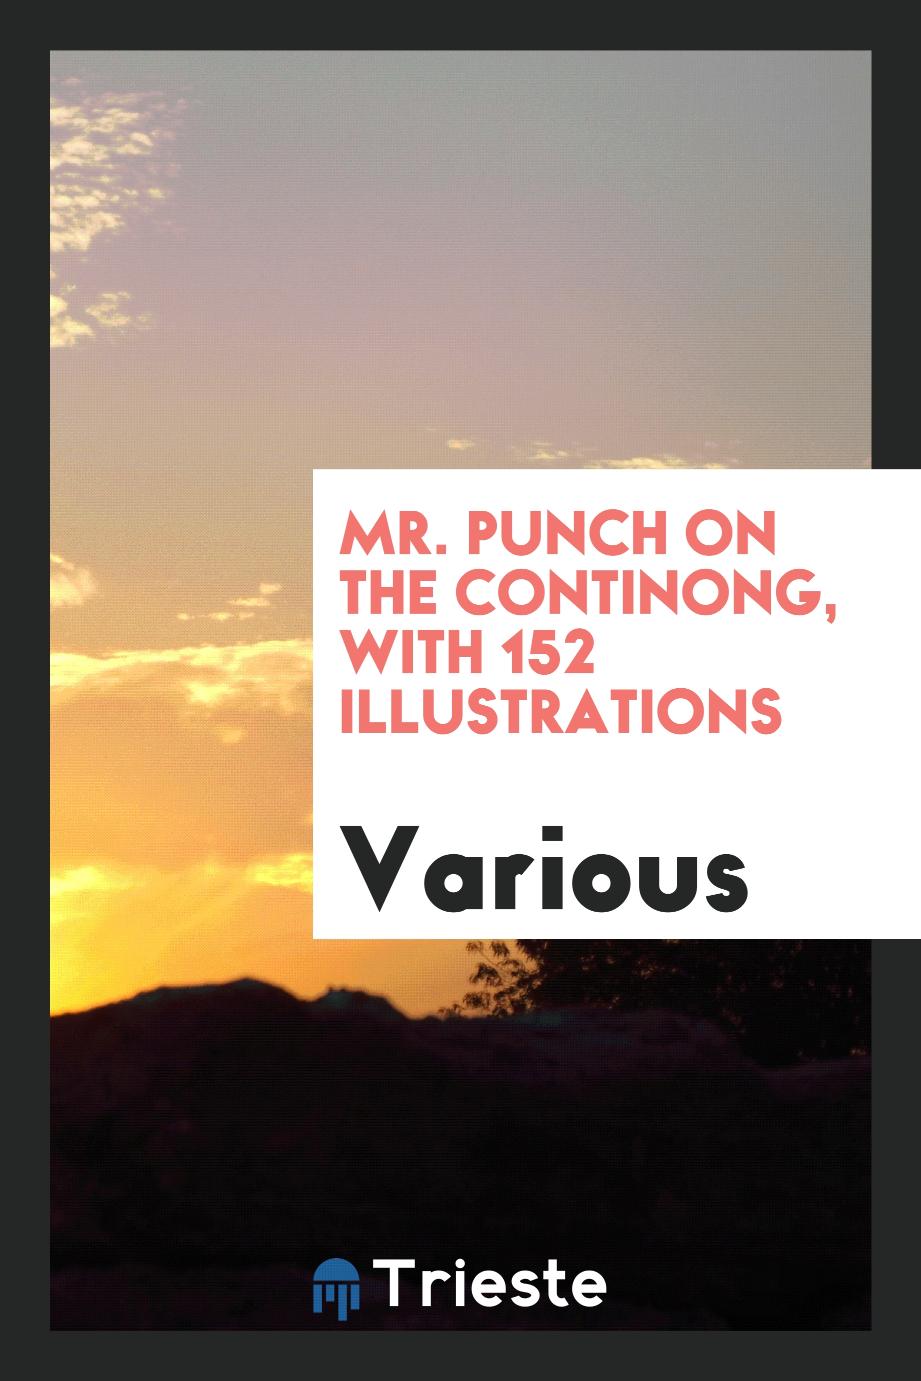 Mr. Punch on the continong, with 152 illustrations